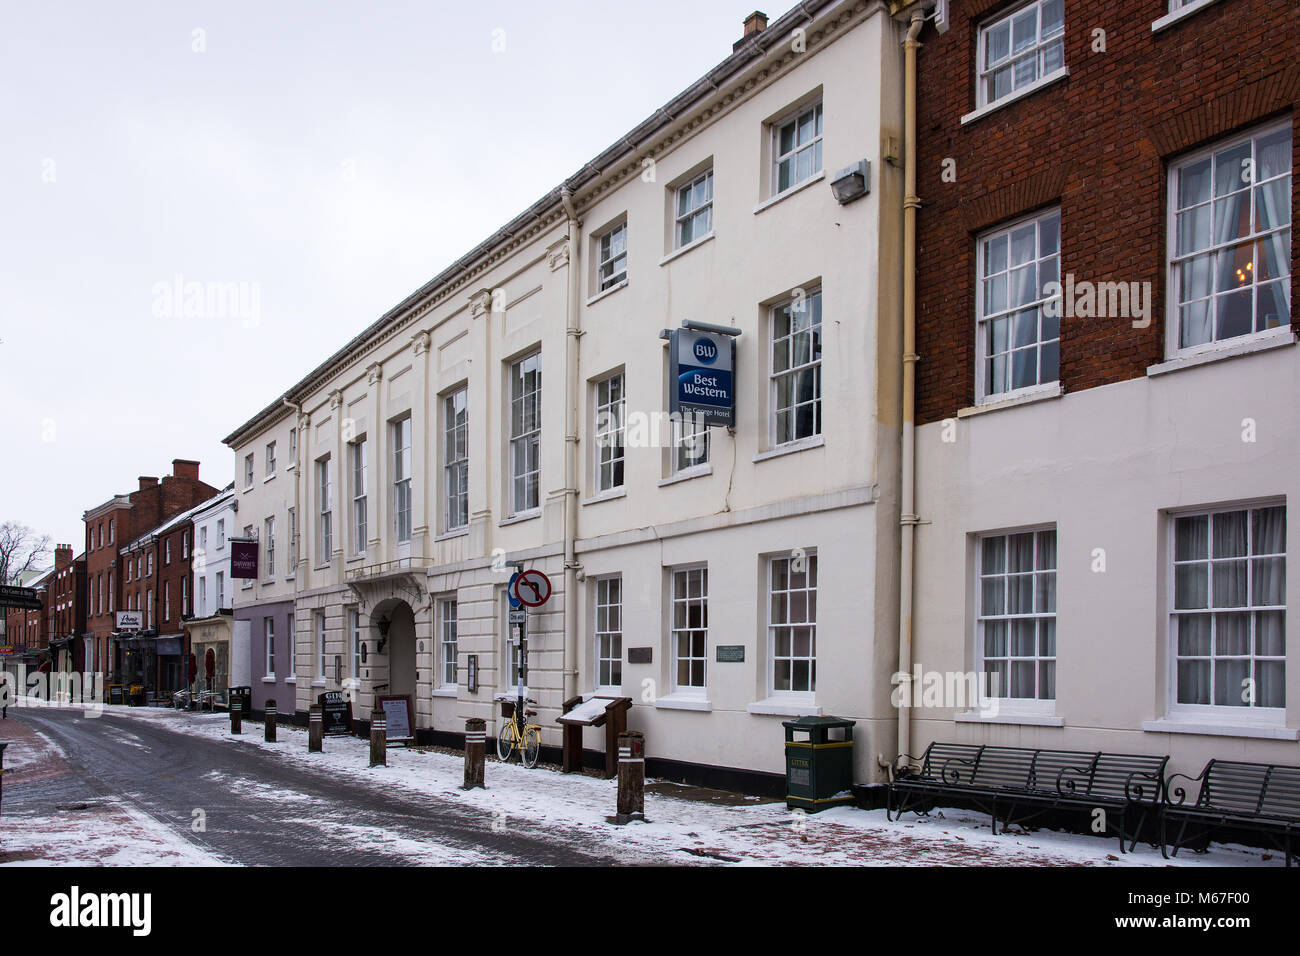 Lichfield Staffordshire England 1st |March 2018.  Snow and ice greet the first day of Spring.  Best Western George Hotel with snow on ground in Bird Street Lichfield Credit: David Keith Jones/Alamy Live News Stock Photo